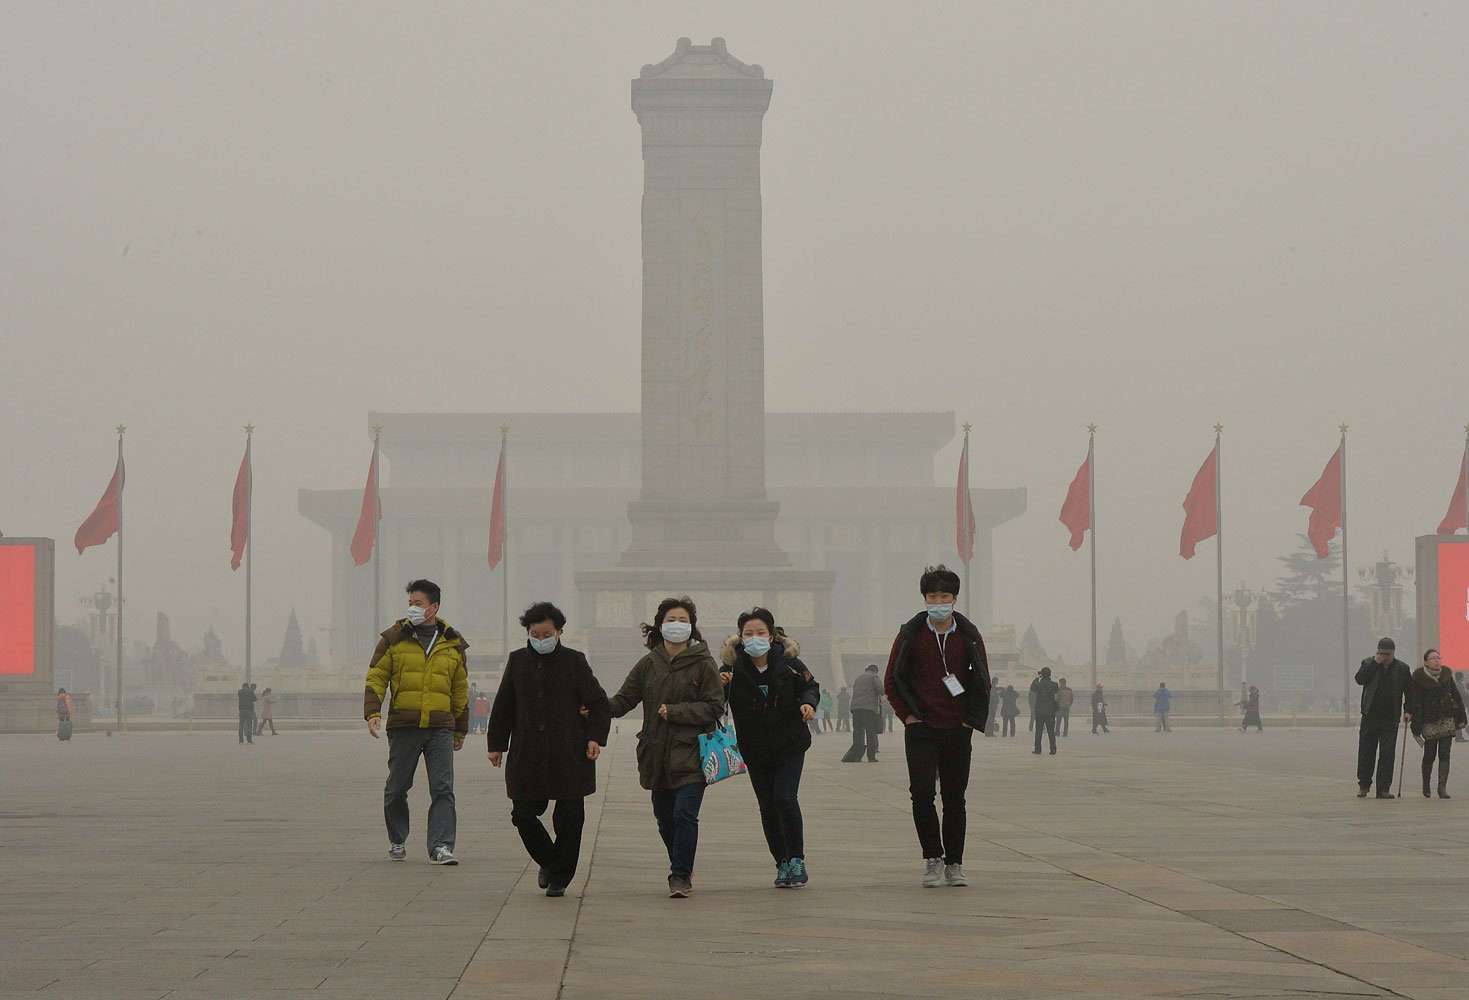 Chinese tourists wearing face masks visit Tiananmen Square as heavy air pollution continues to shroud Beijing on Feb. 26, 2014.